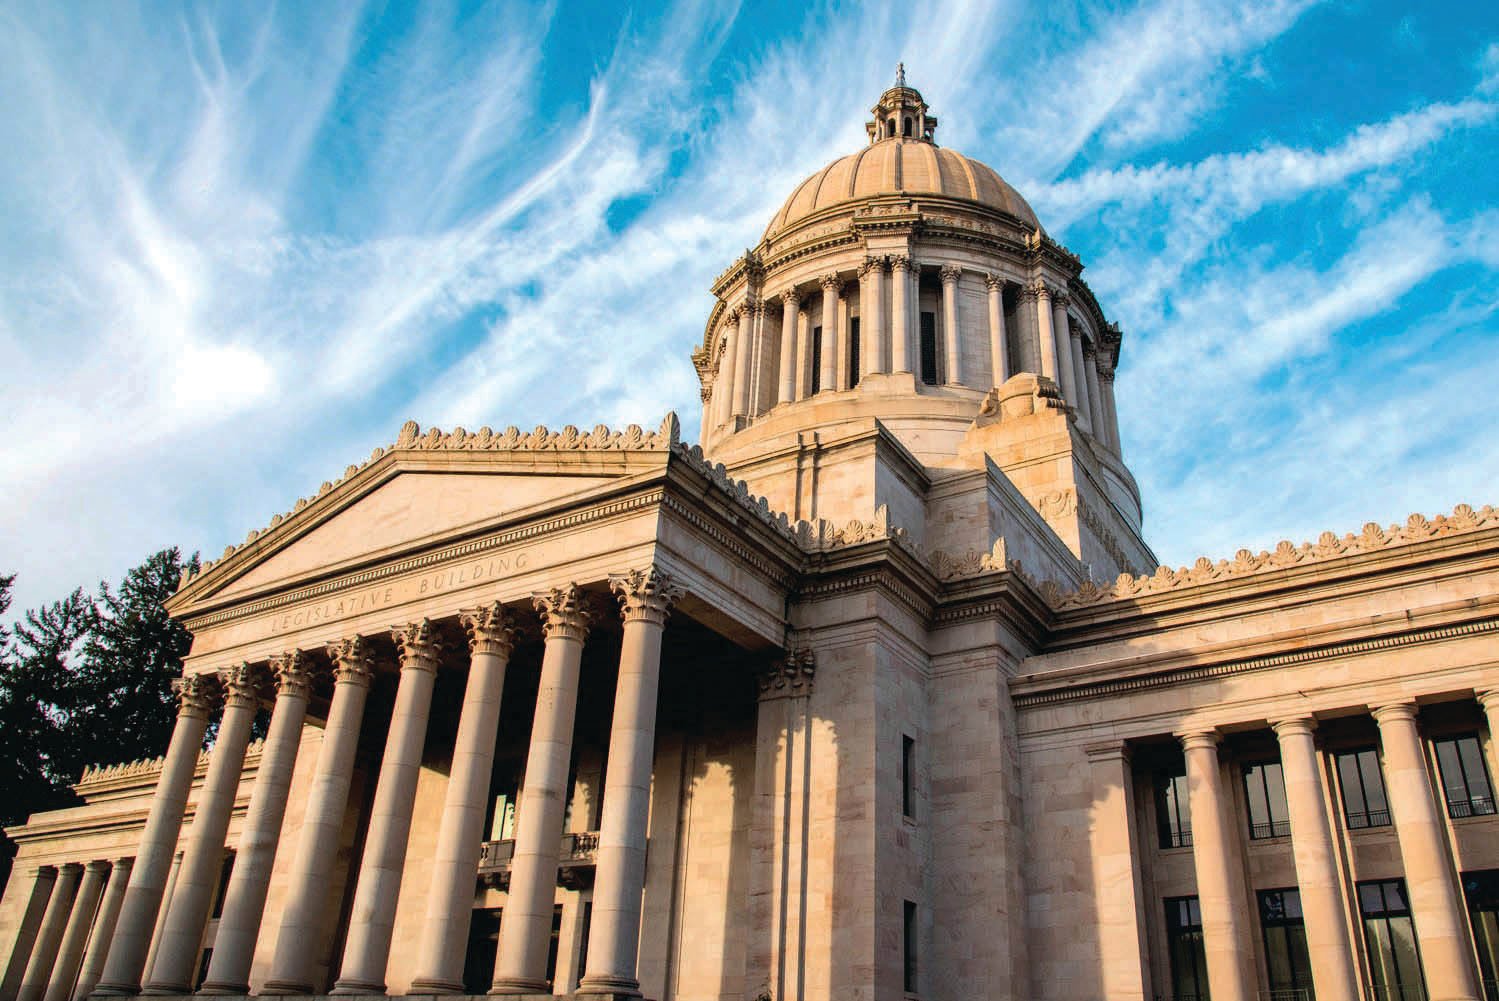 The Washington State Capitol building in Olympia is pictured